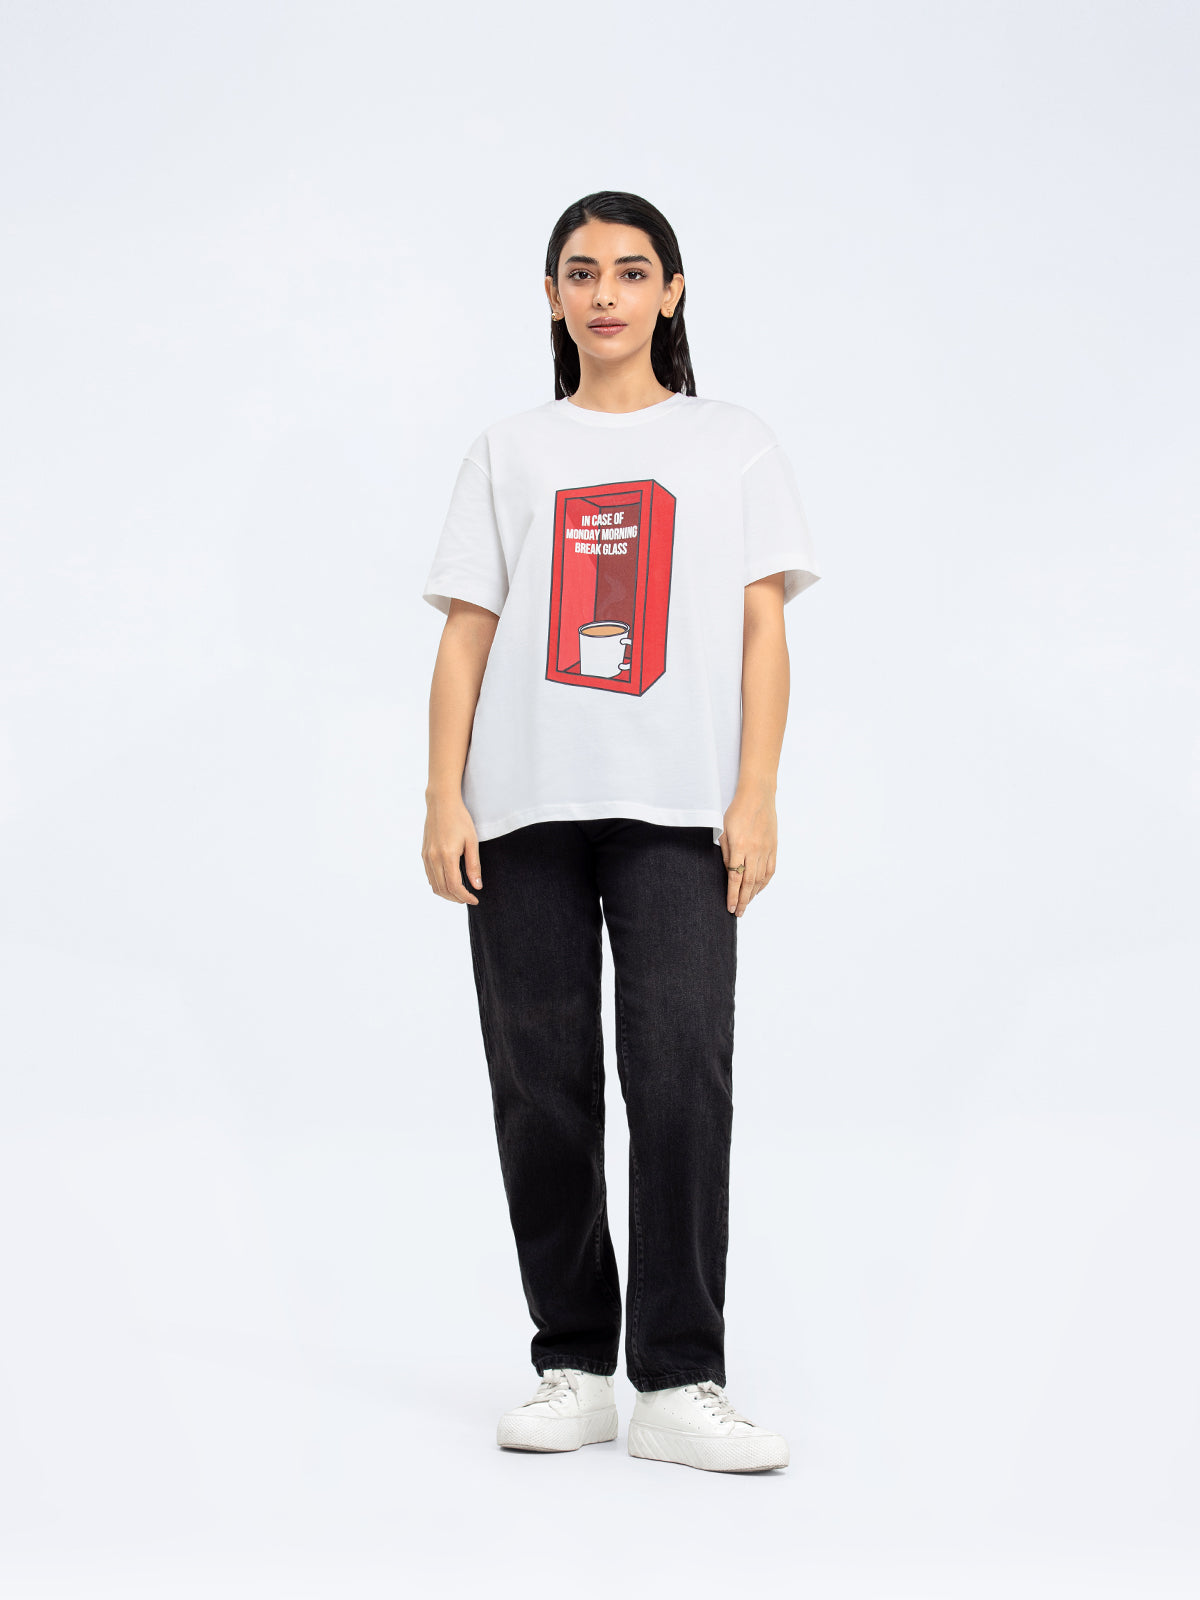 Relaxed Fit Graphic Tee - FWTGT24-017